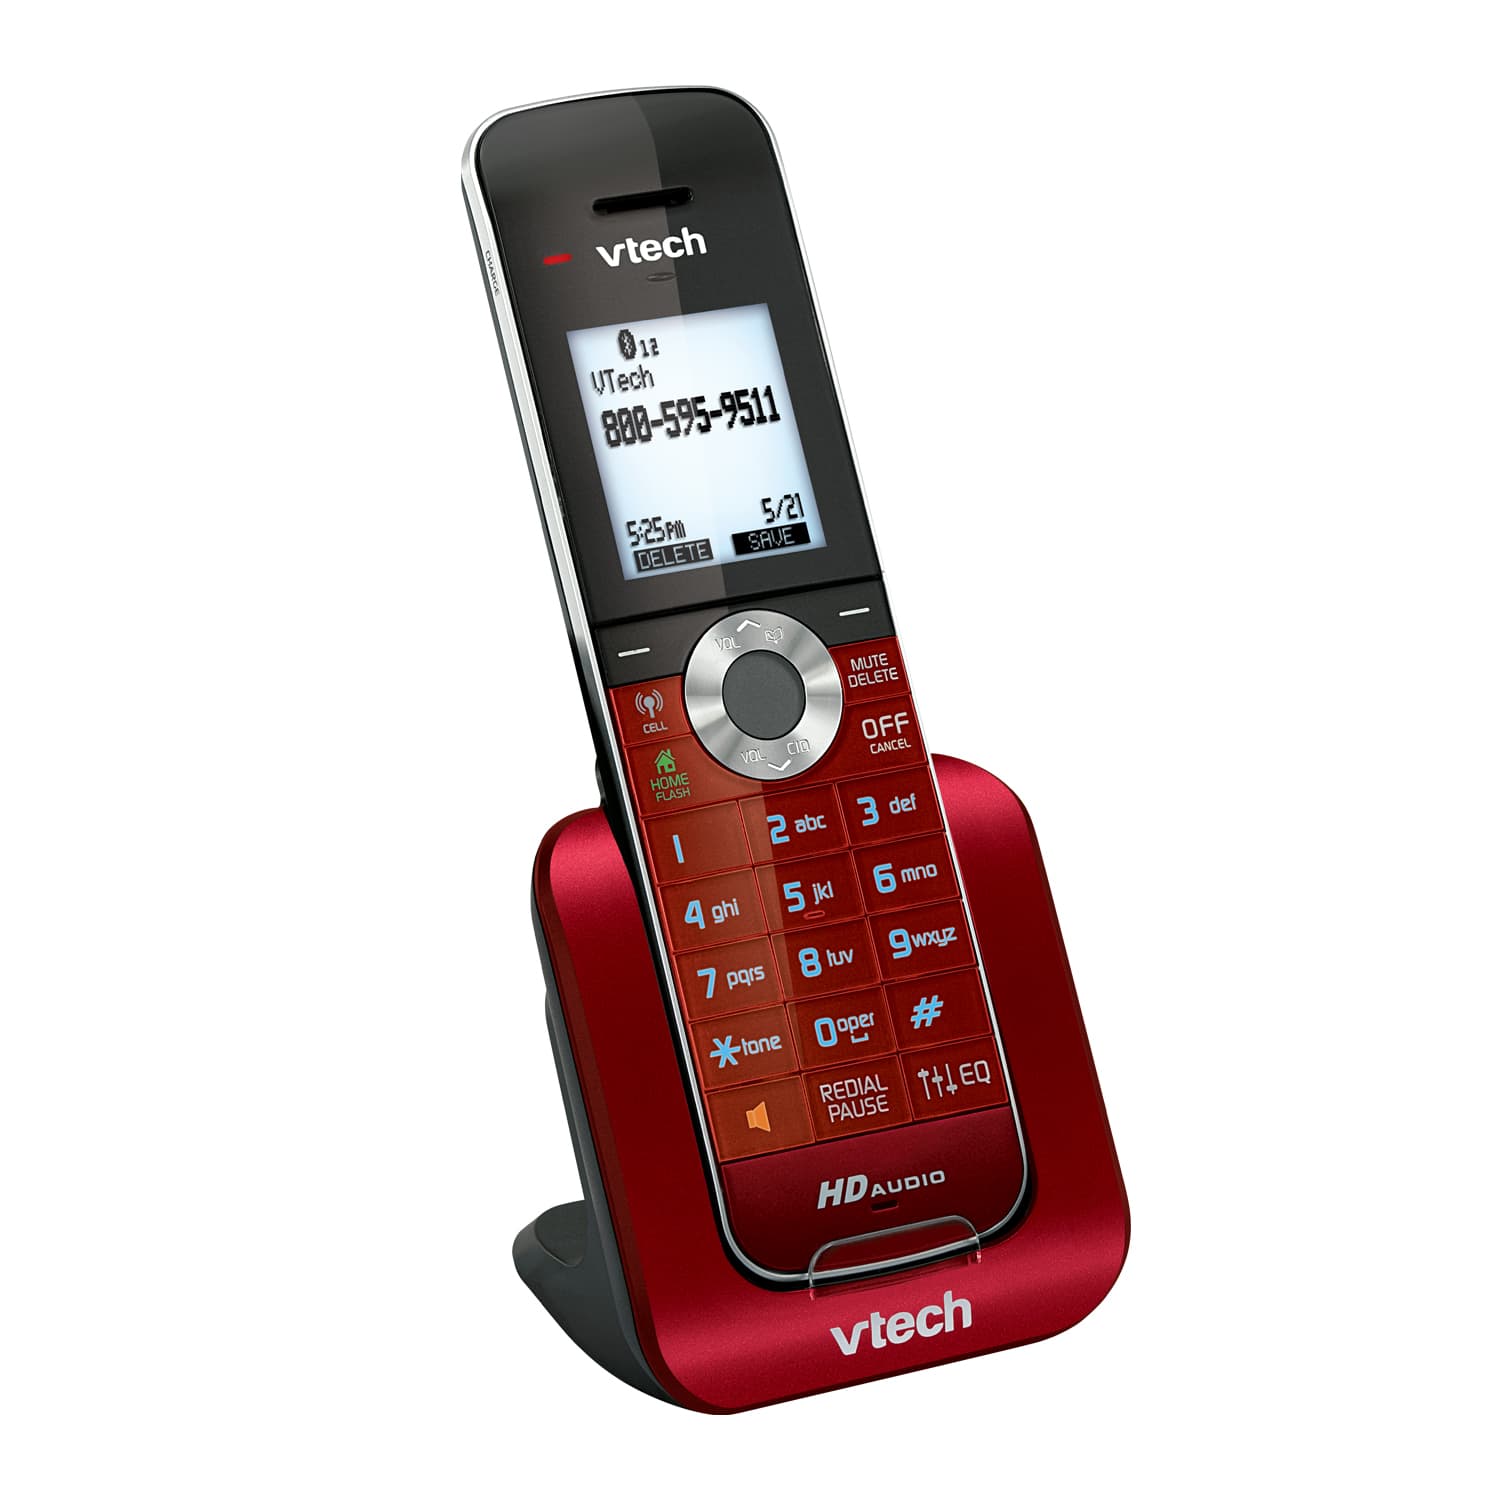 7 Handset Connect to Cell™ Answering System with Caller ID/Call Waiting - view 8